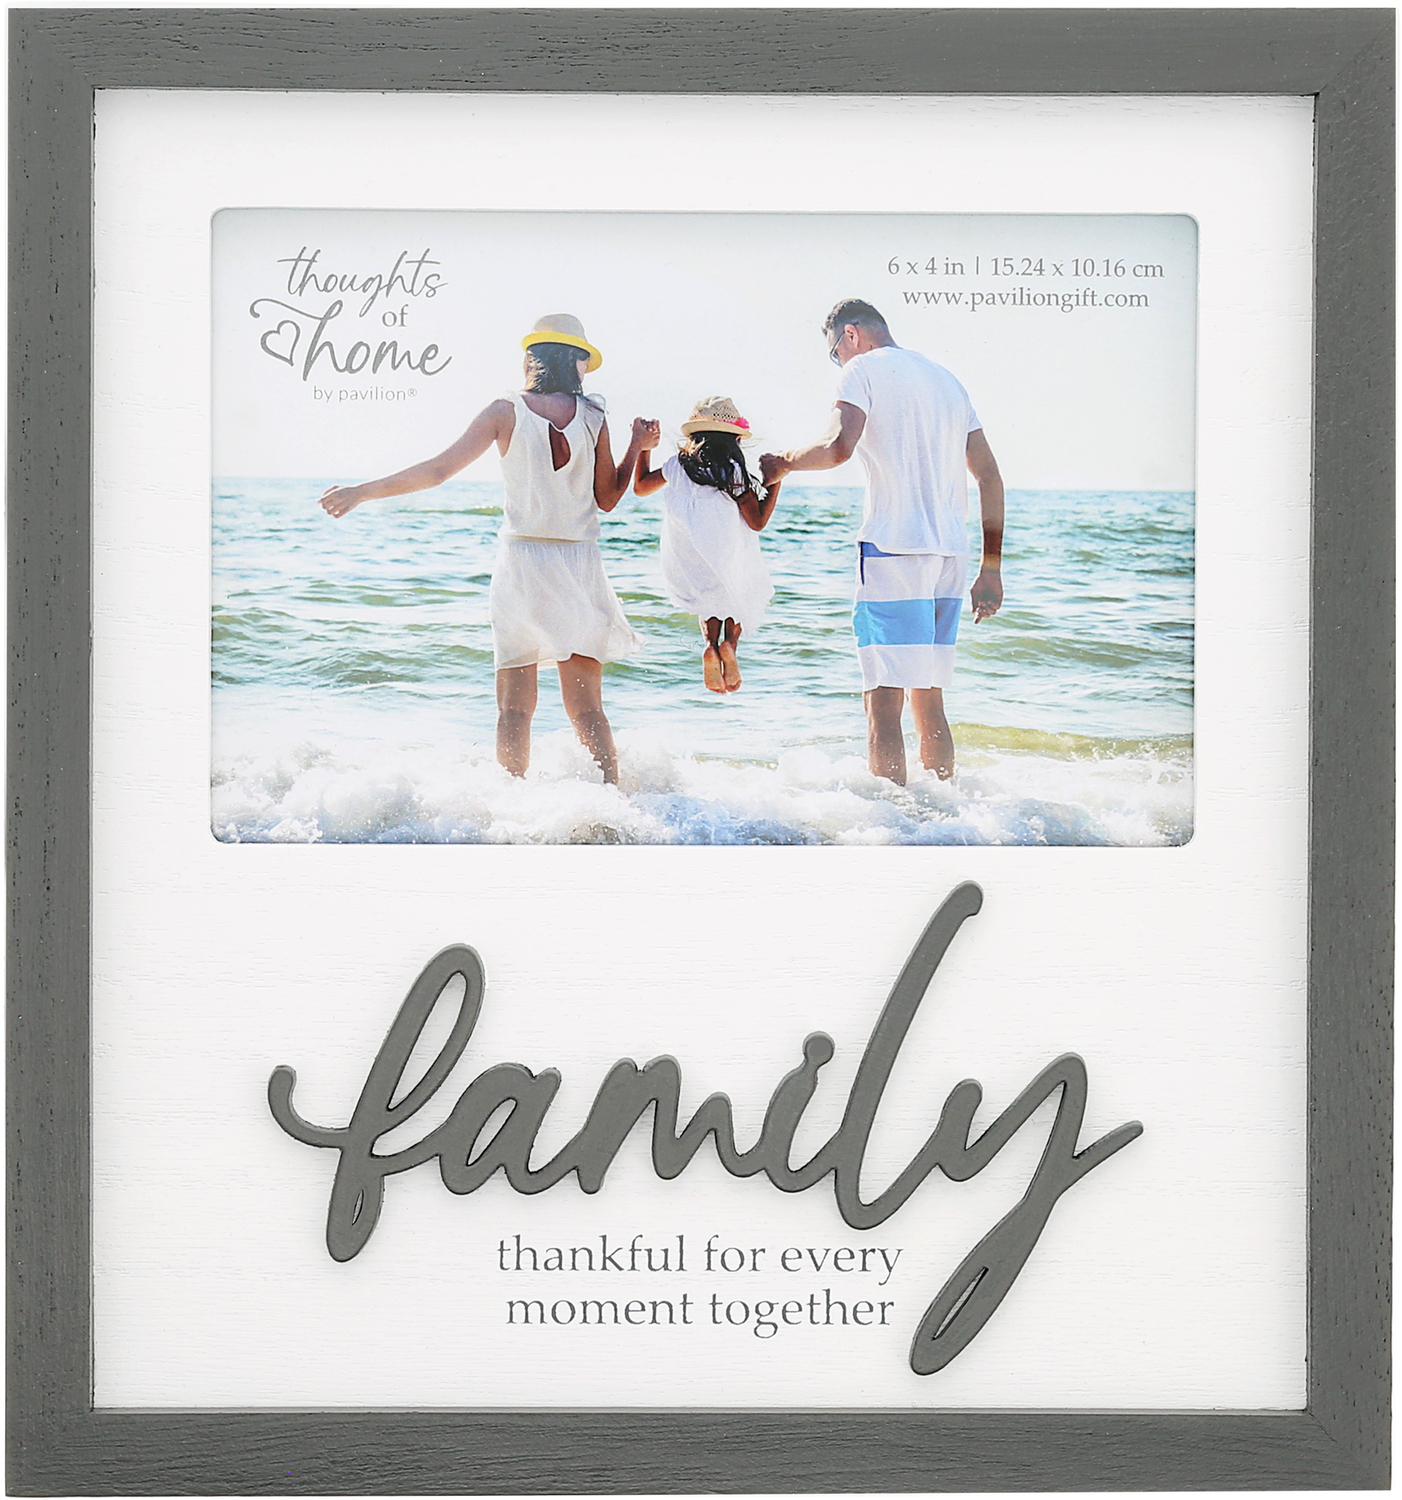 Family by Thoughts of Home - Family - 7.75" x 8.25" Frame (Holds 6" x 4" Photo)